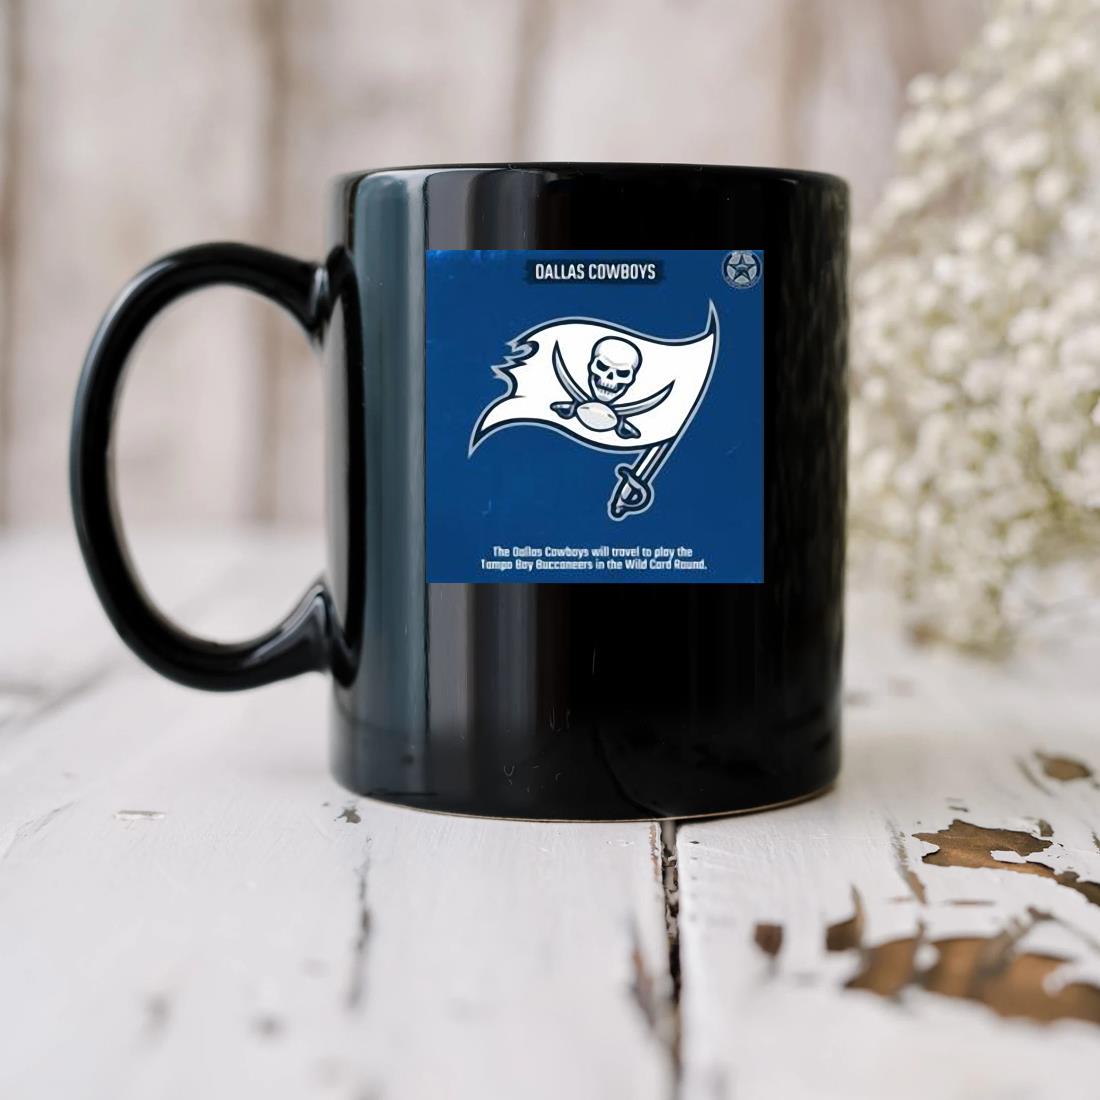 Dallas Cowboys The Dallas Cowboys Will Travel To Play The Tampa Bay Buccaneers In The Wild Card Round Mug biu